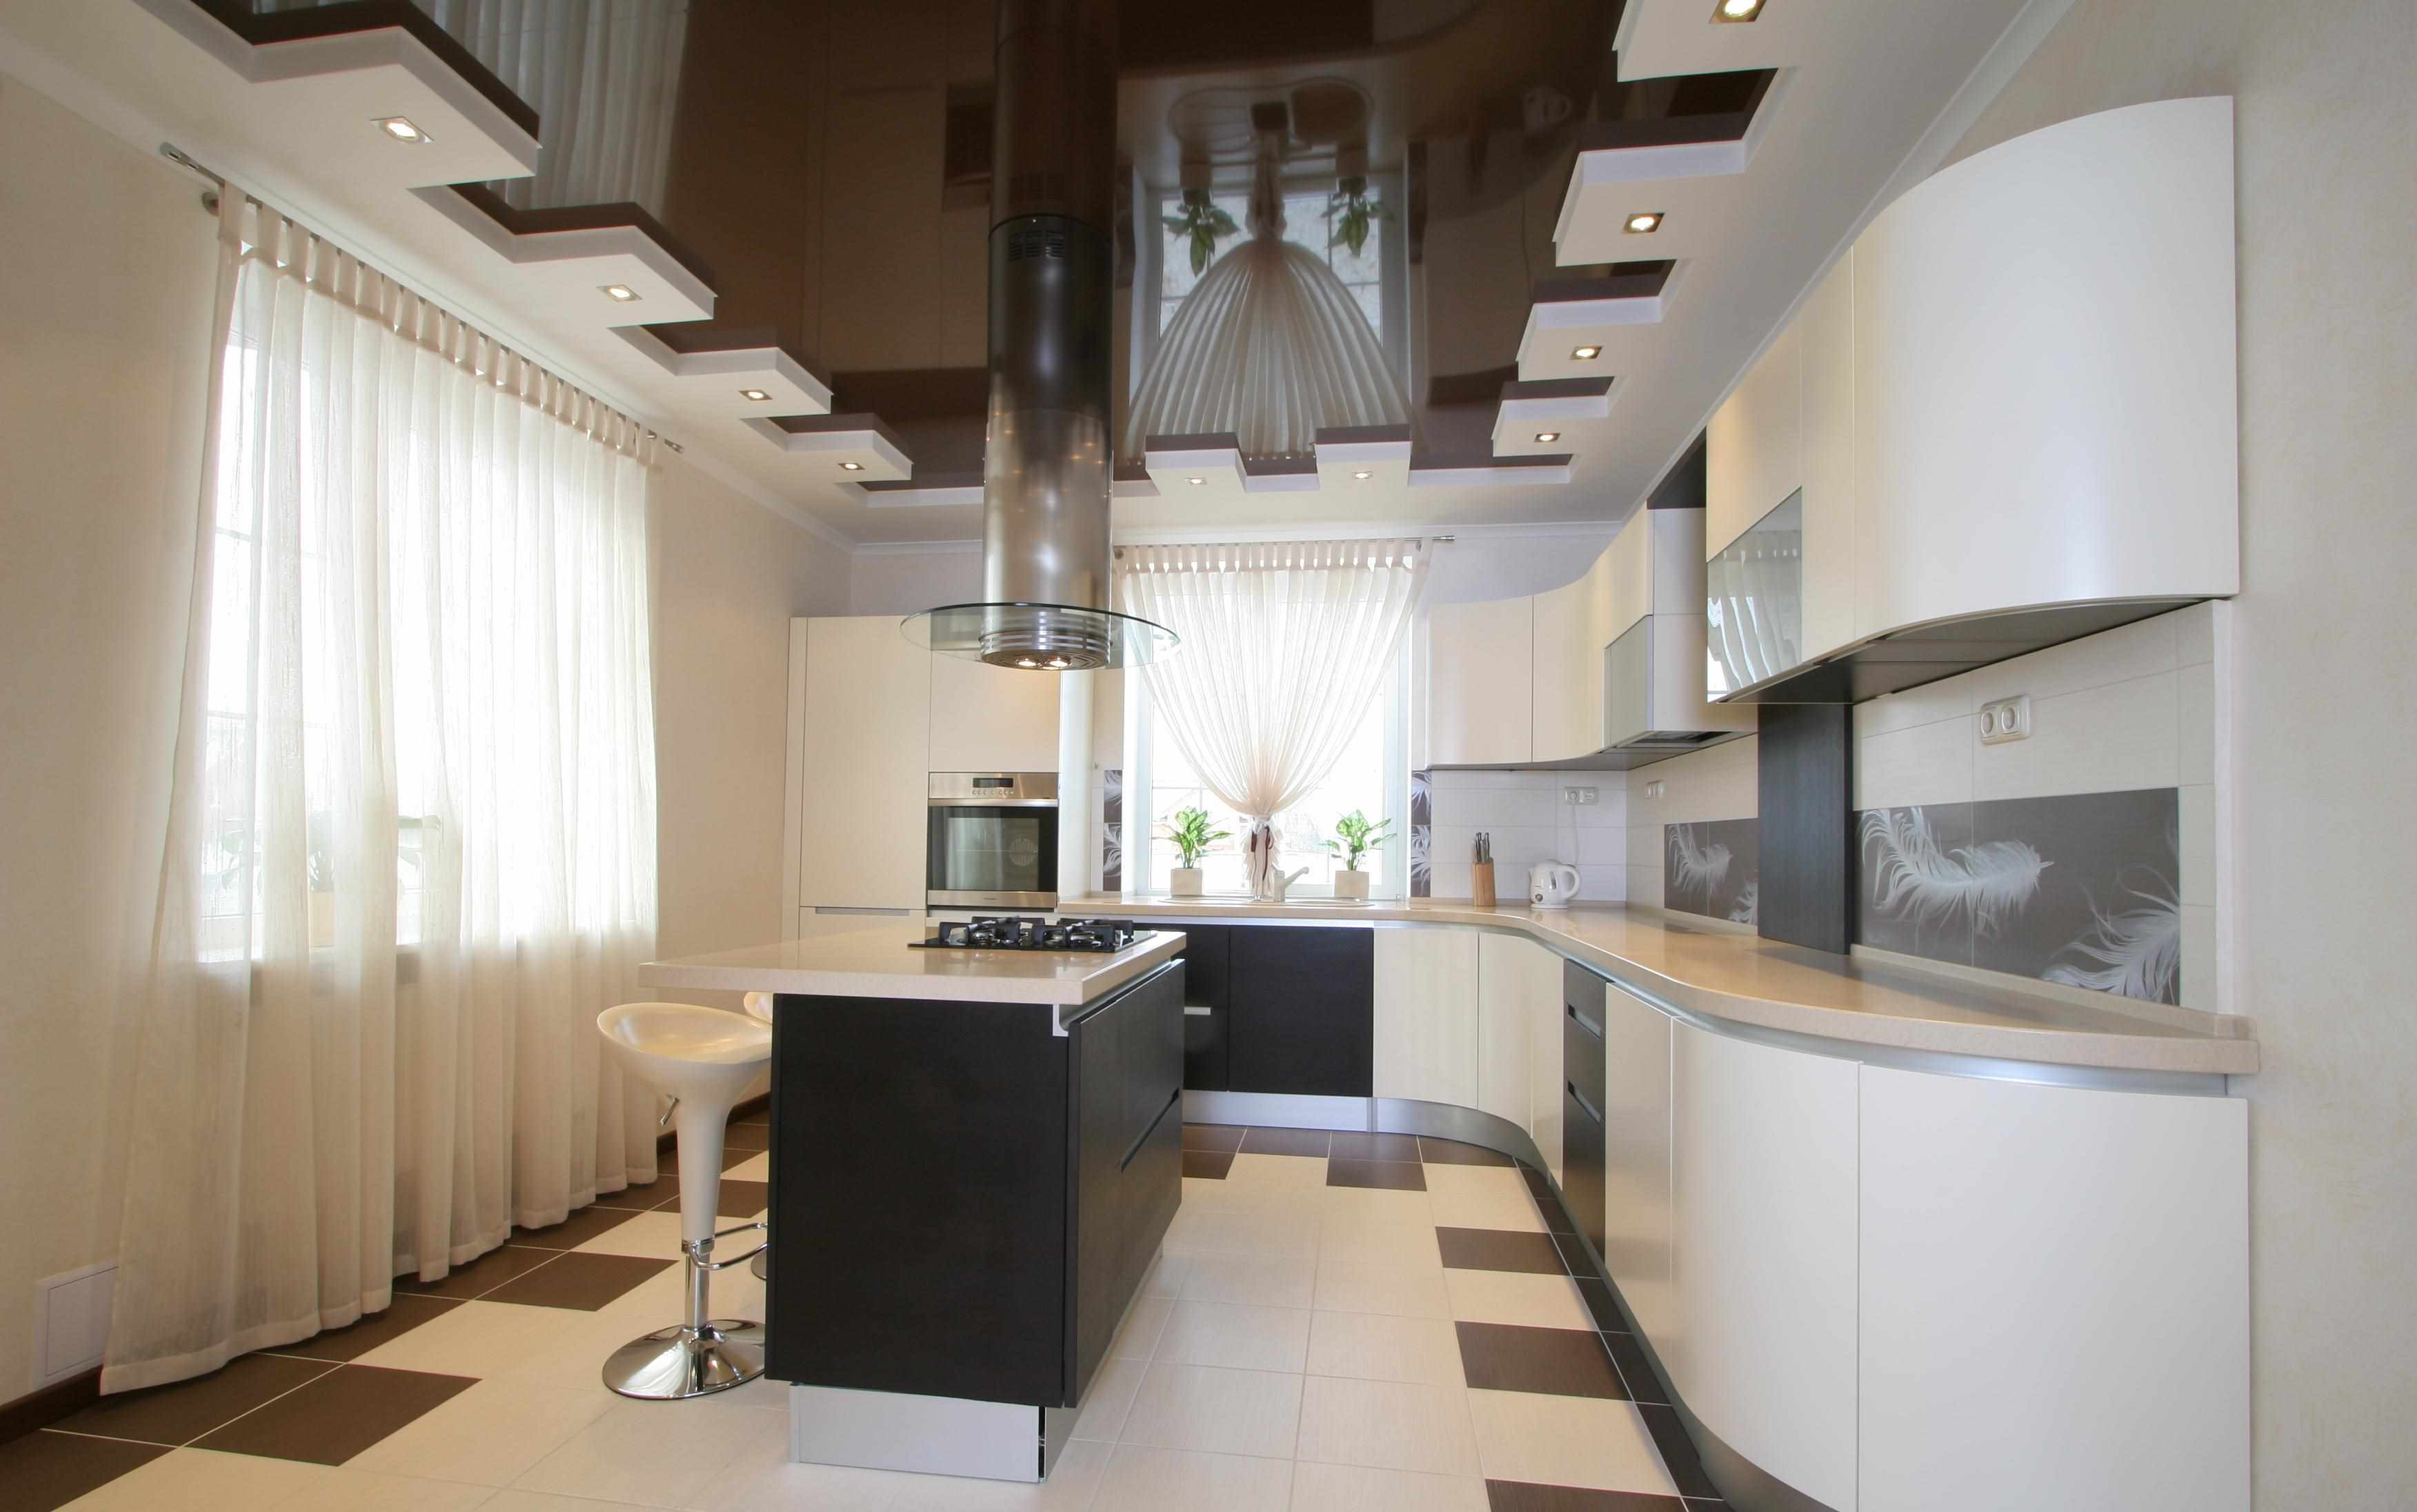 variant of the unusual design of the kitchen ceiling